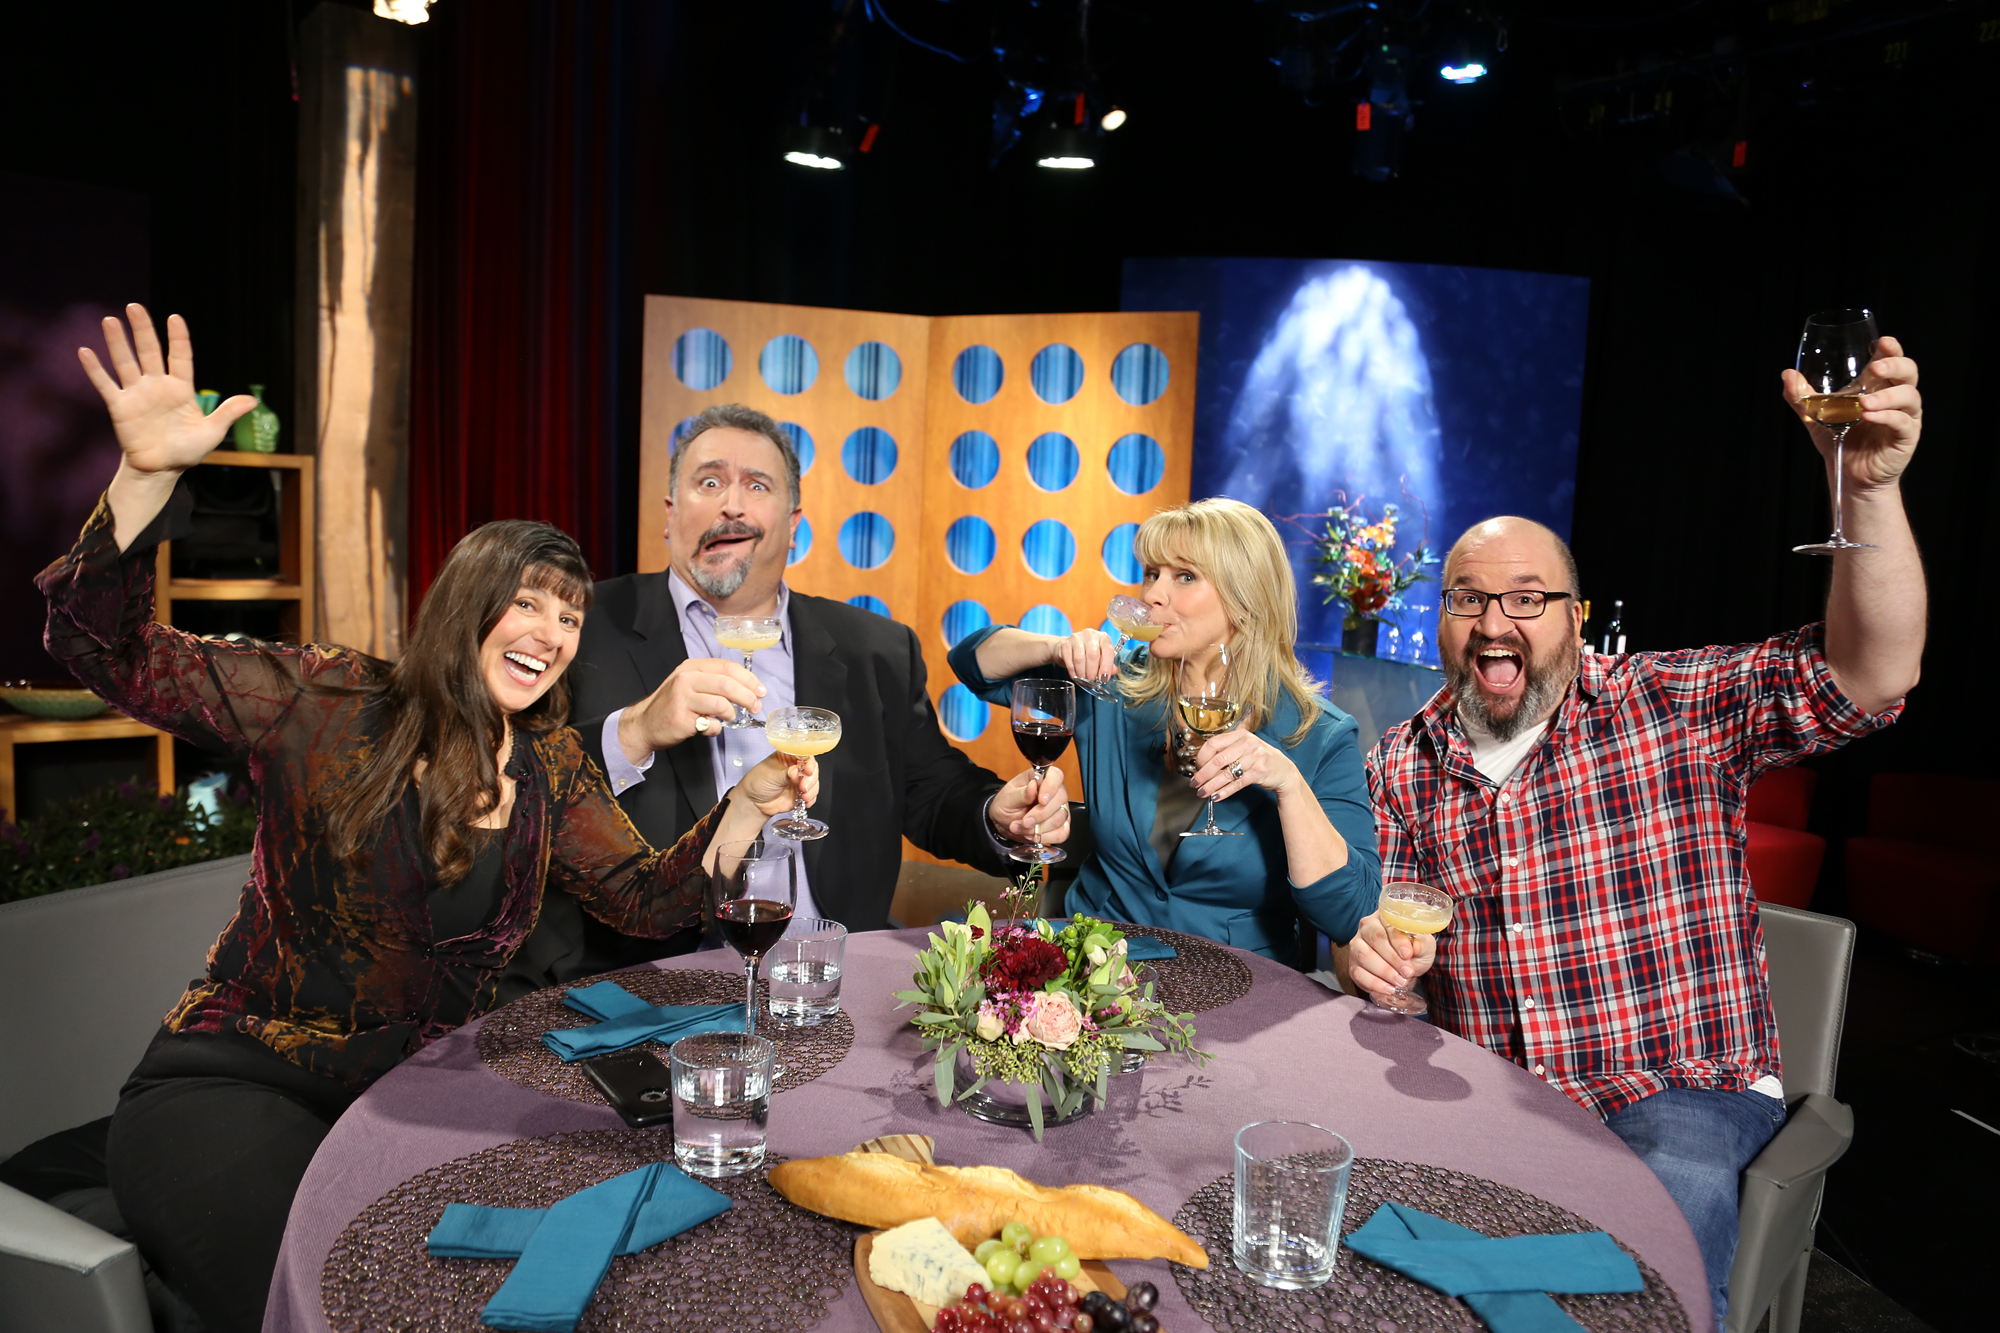 Host Leslie Sbrocco and guests having fun on the set of season 12 episode 6.